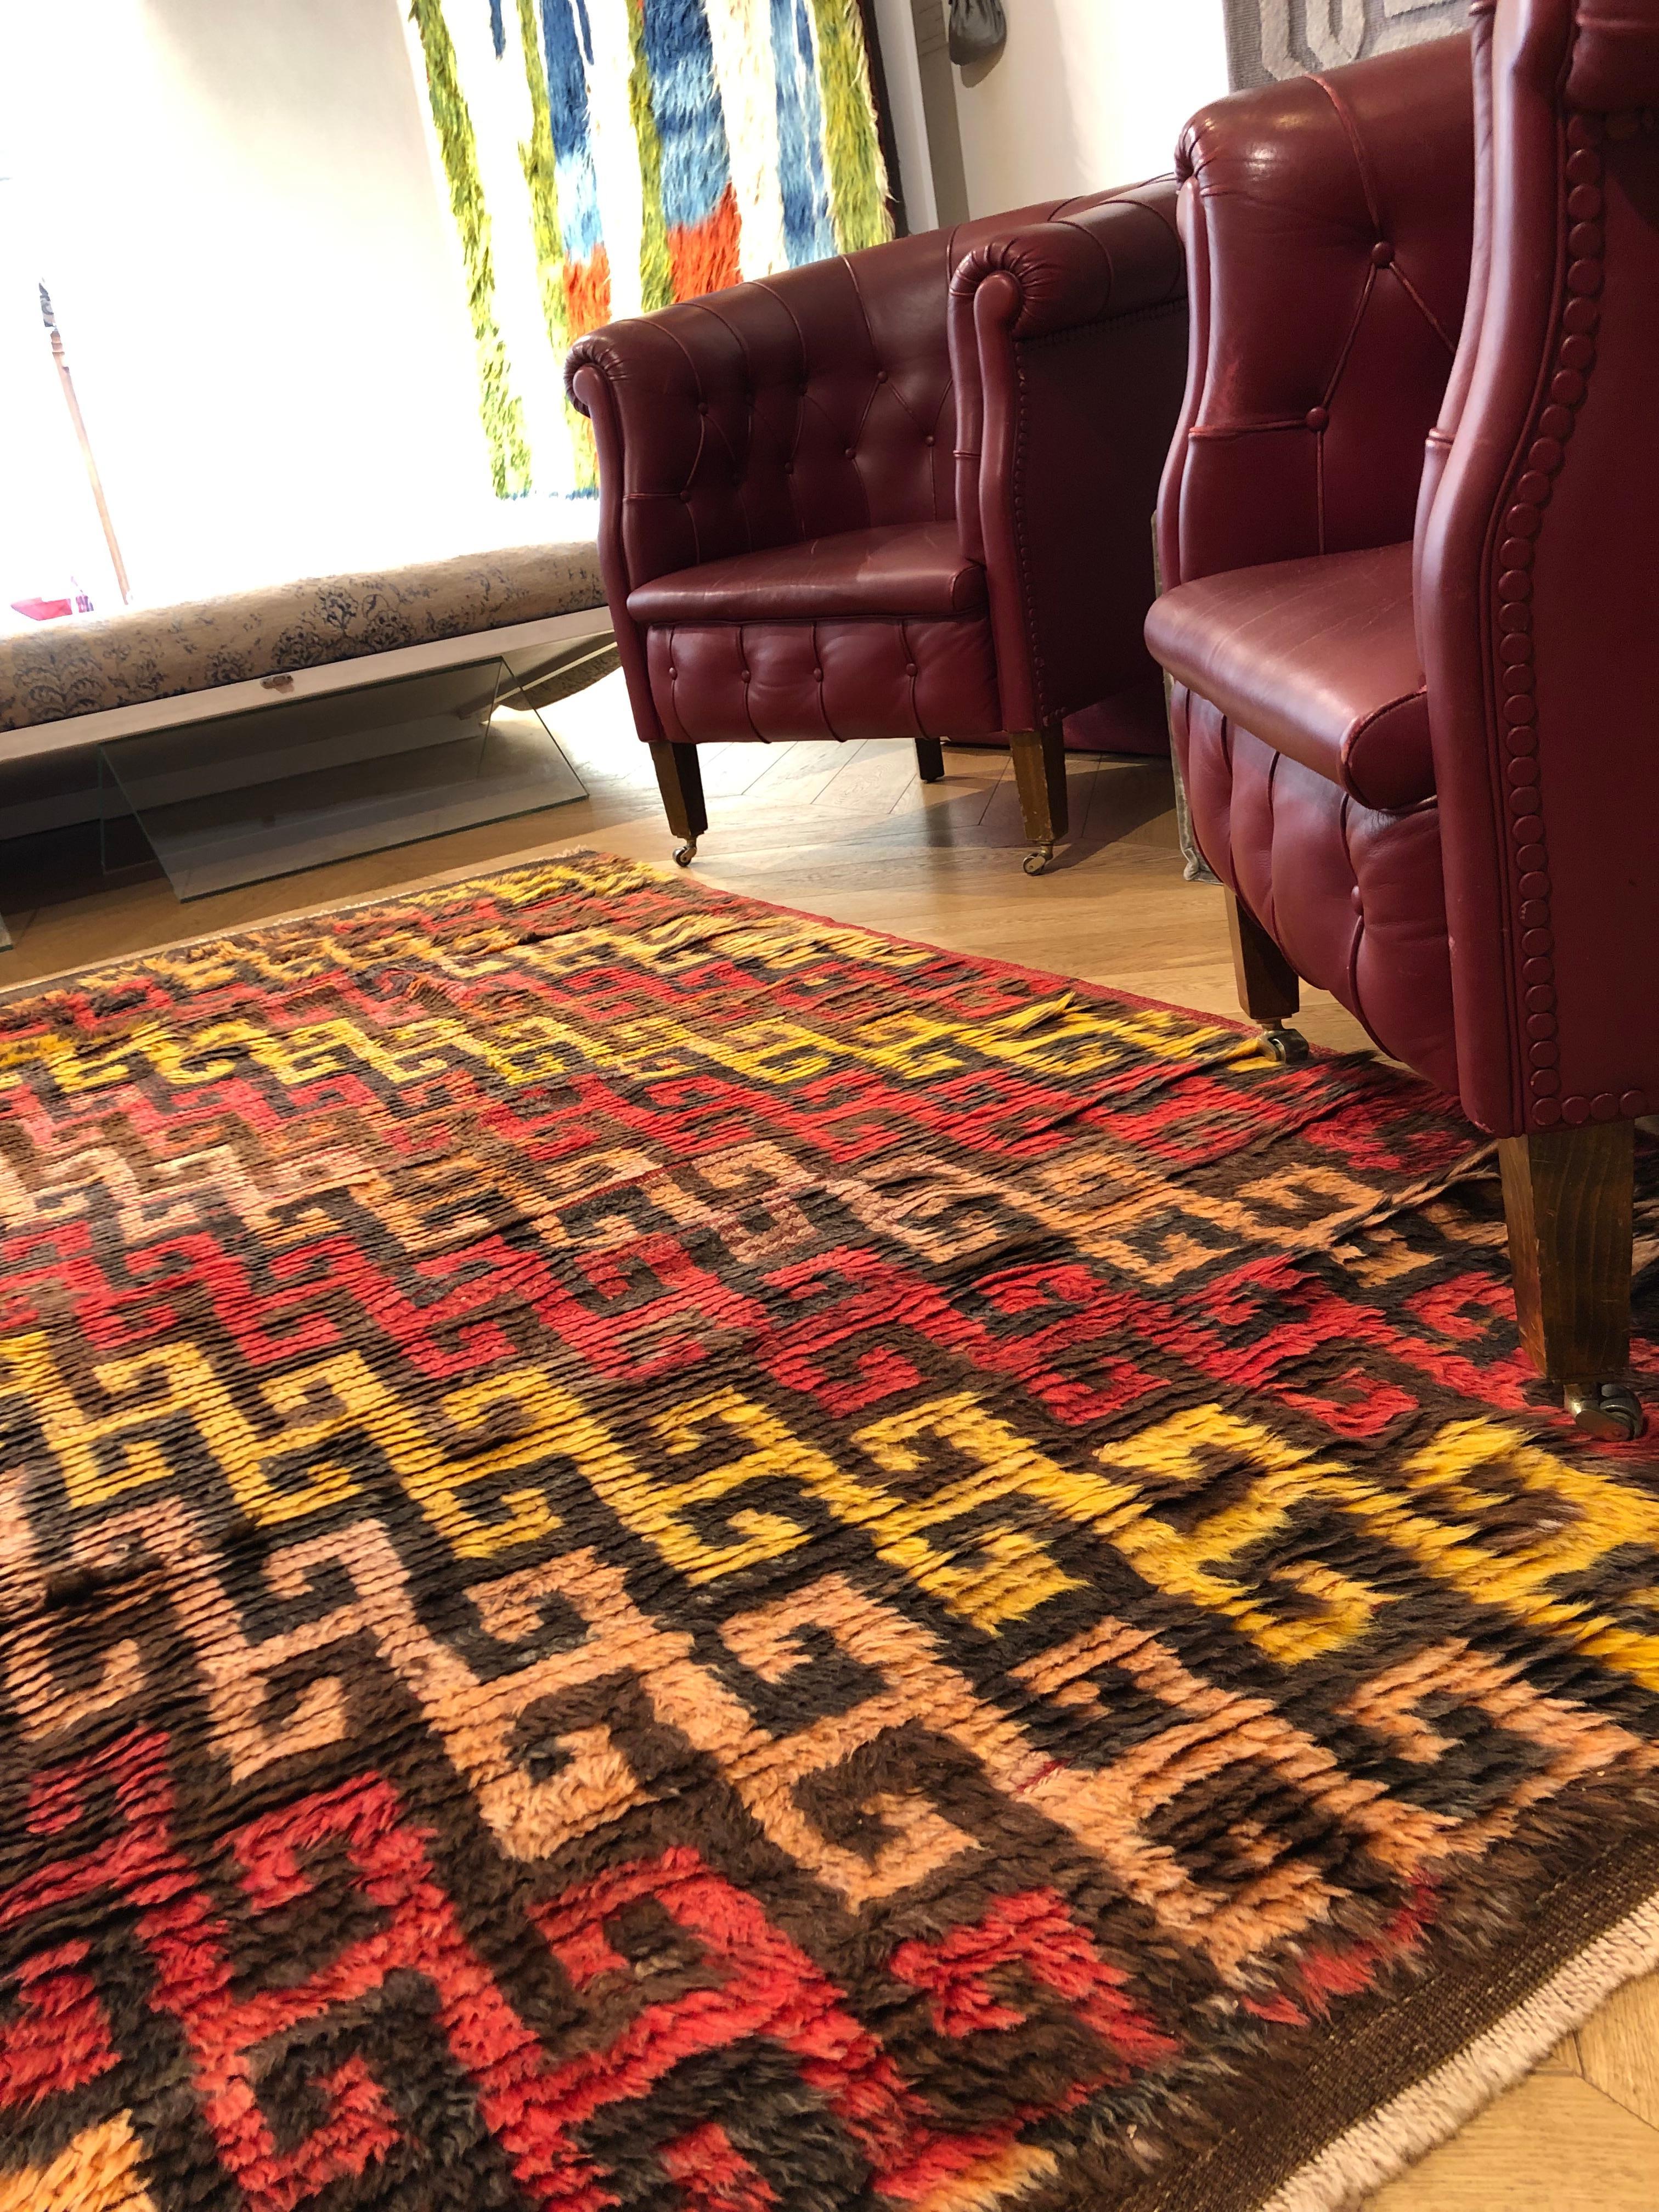 The tulus come from the highlands of central Anatolia. Village rugs, which are born in the family looms, are characterized by a very long fleece and a shiny and resistant wool. Abstract and essential motifs are decorated. They are not meant to be